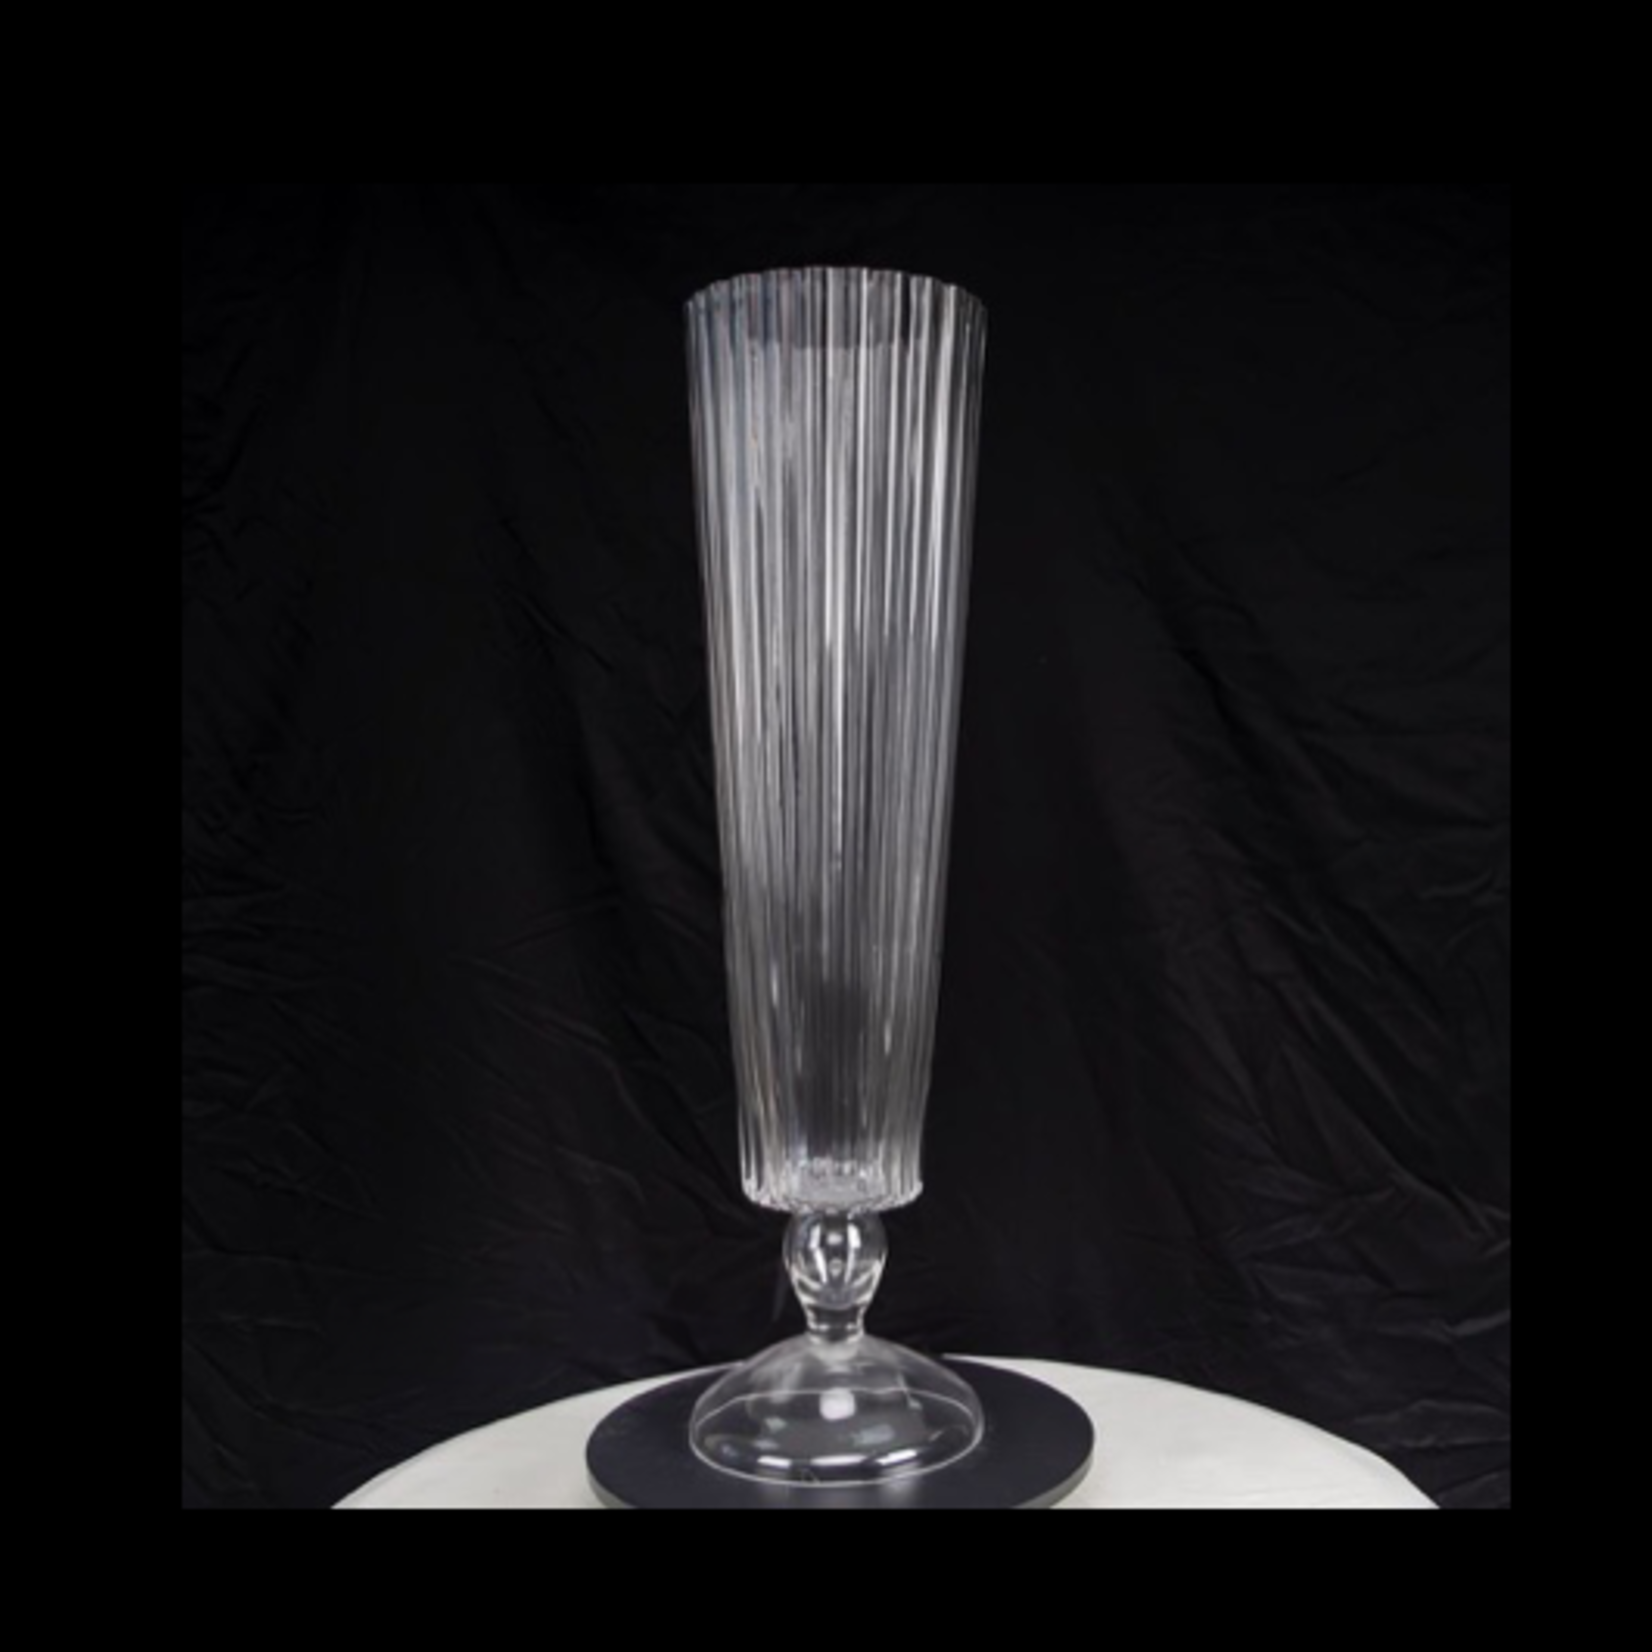 50% off was $70 now $35. 25.5” X 6.5” GLASS FLUTED BESPOKE LIKE TRUMPET VASE